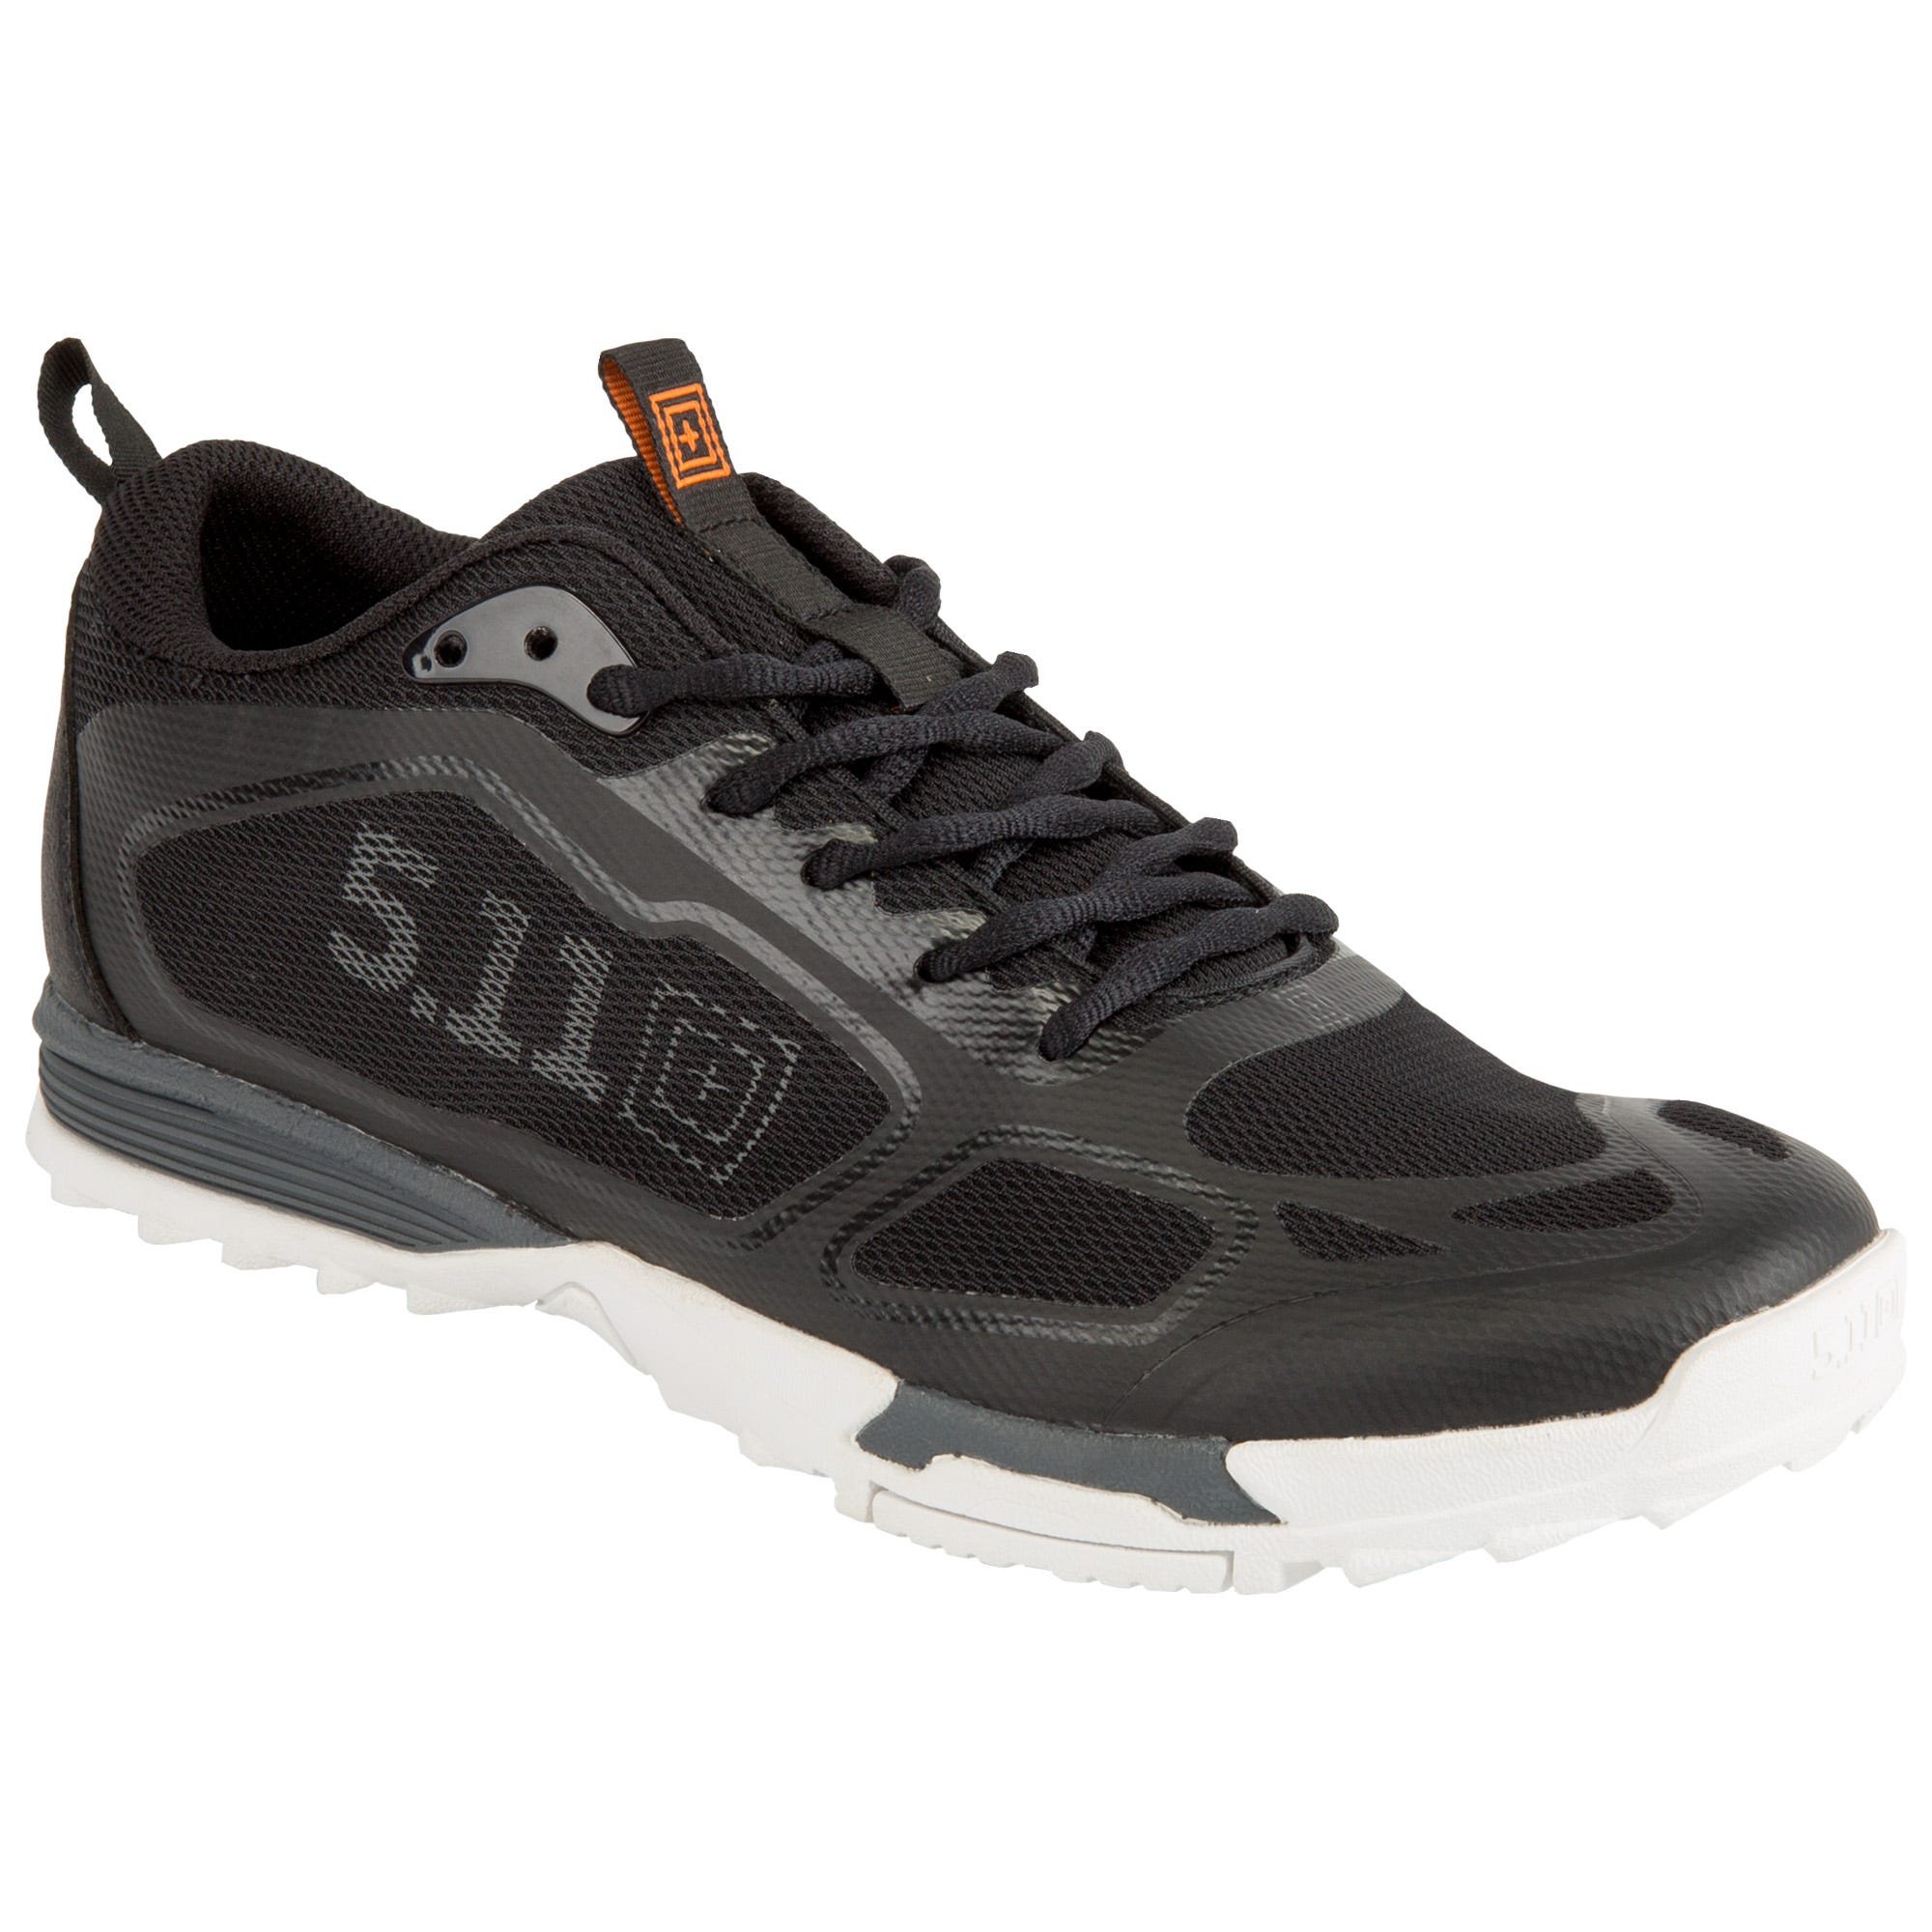 5.11 Tactical Women's Womens ABR Trainer Shoes